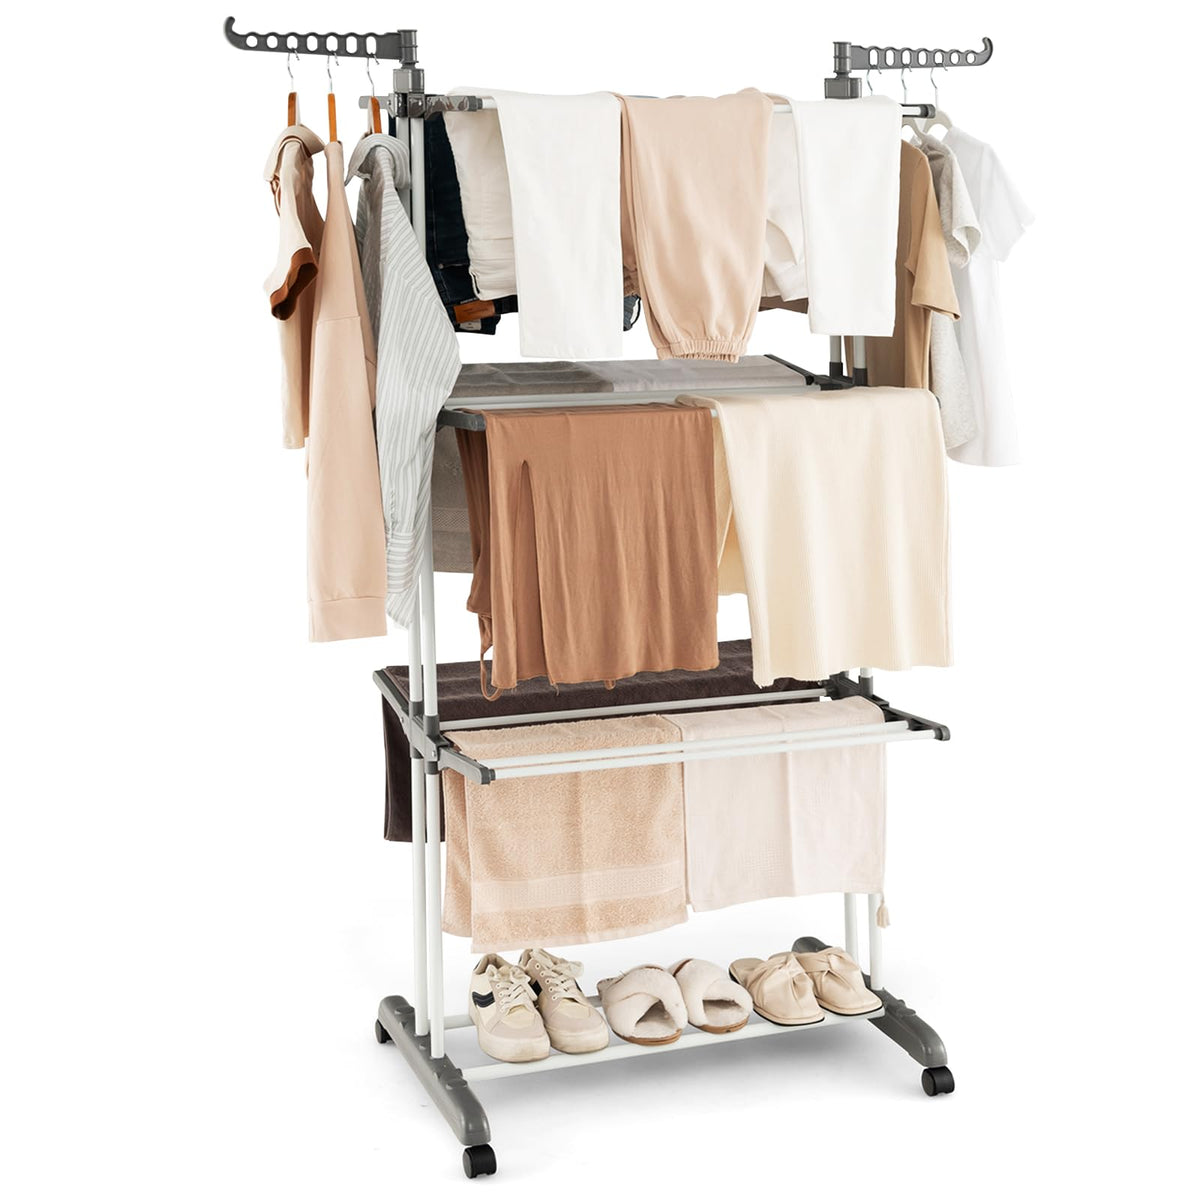 Giantex 4-Tier Clothes Drying Rack, Folding Clothes Horse Stand with Rotatable Side Wings